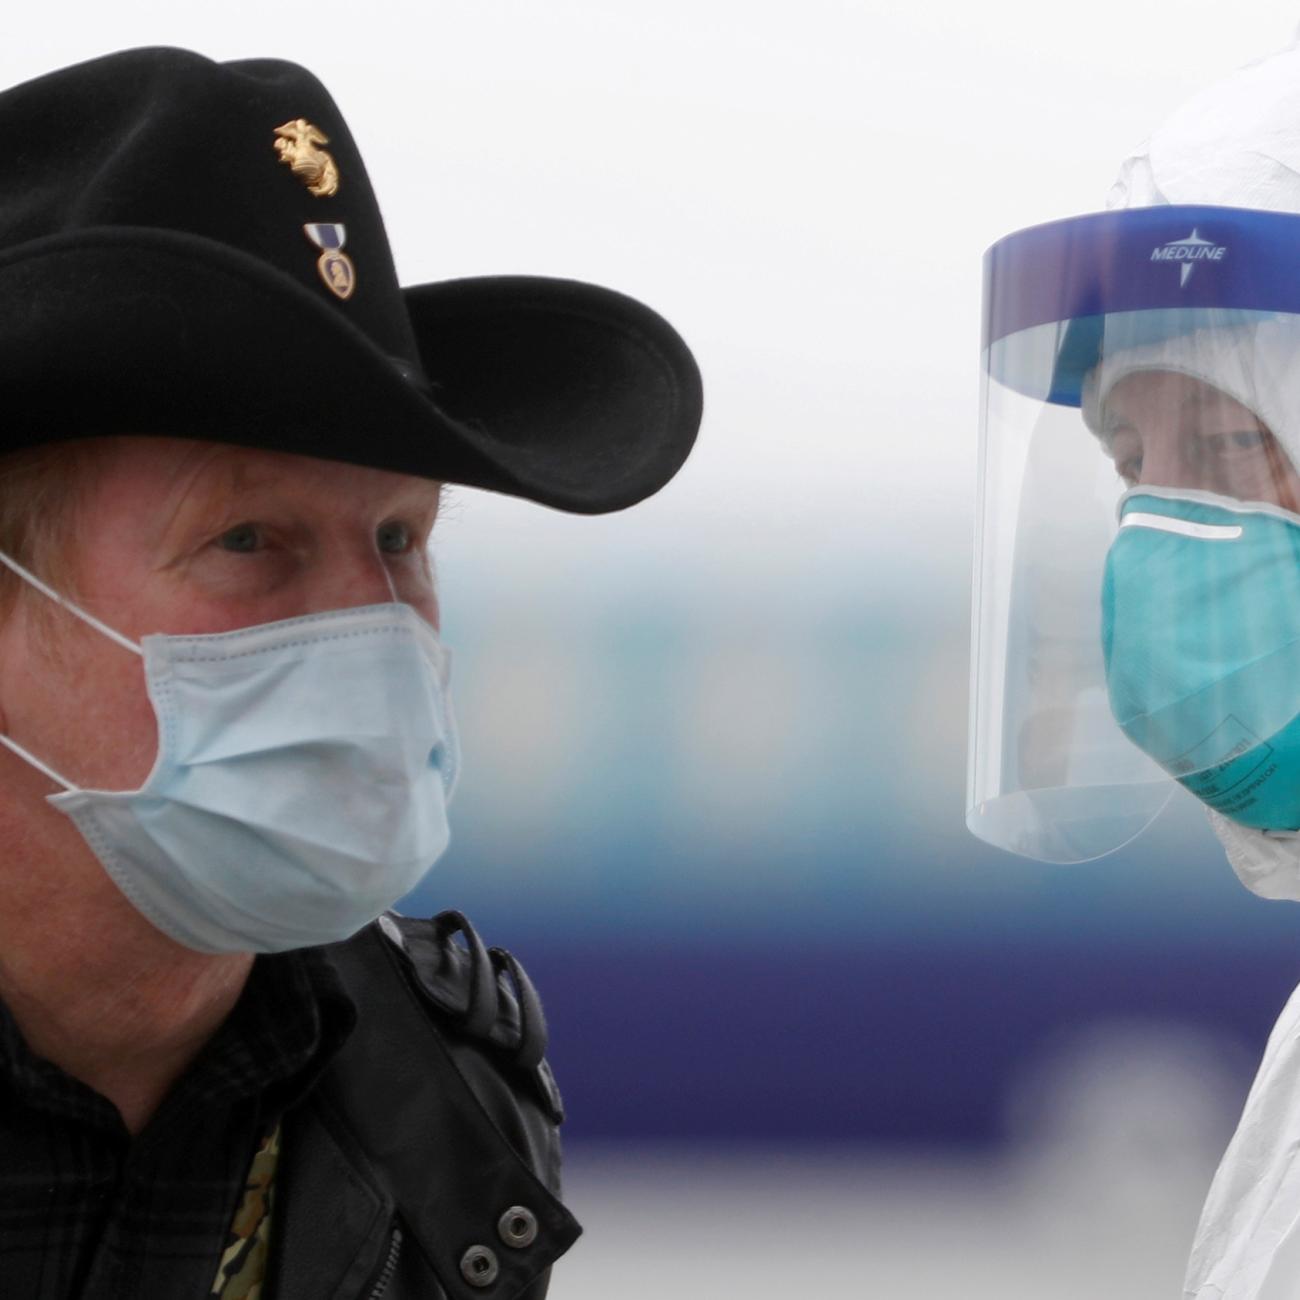 A worker in protective gear directs a masked passenger disembarking from the cruise ship Grand Princess in Oakland, California on March 10, 2020 amid concern over the growing COVID-19 pandemic. The picture shows a man wearing a mask and a cowboy hat standing facing a health worker in full protective gear. REUTERS/Stephen Lam 